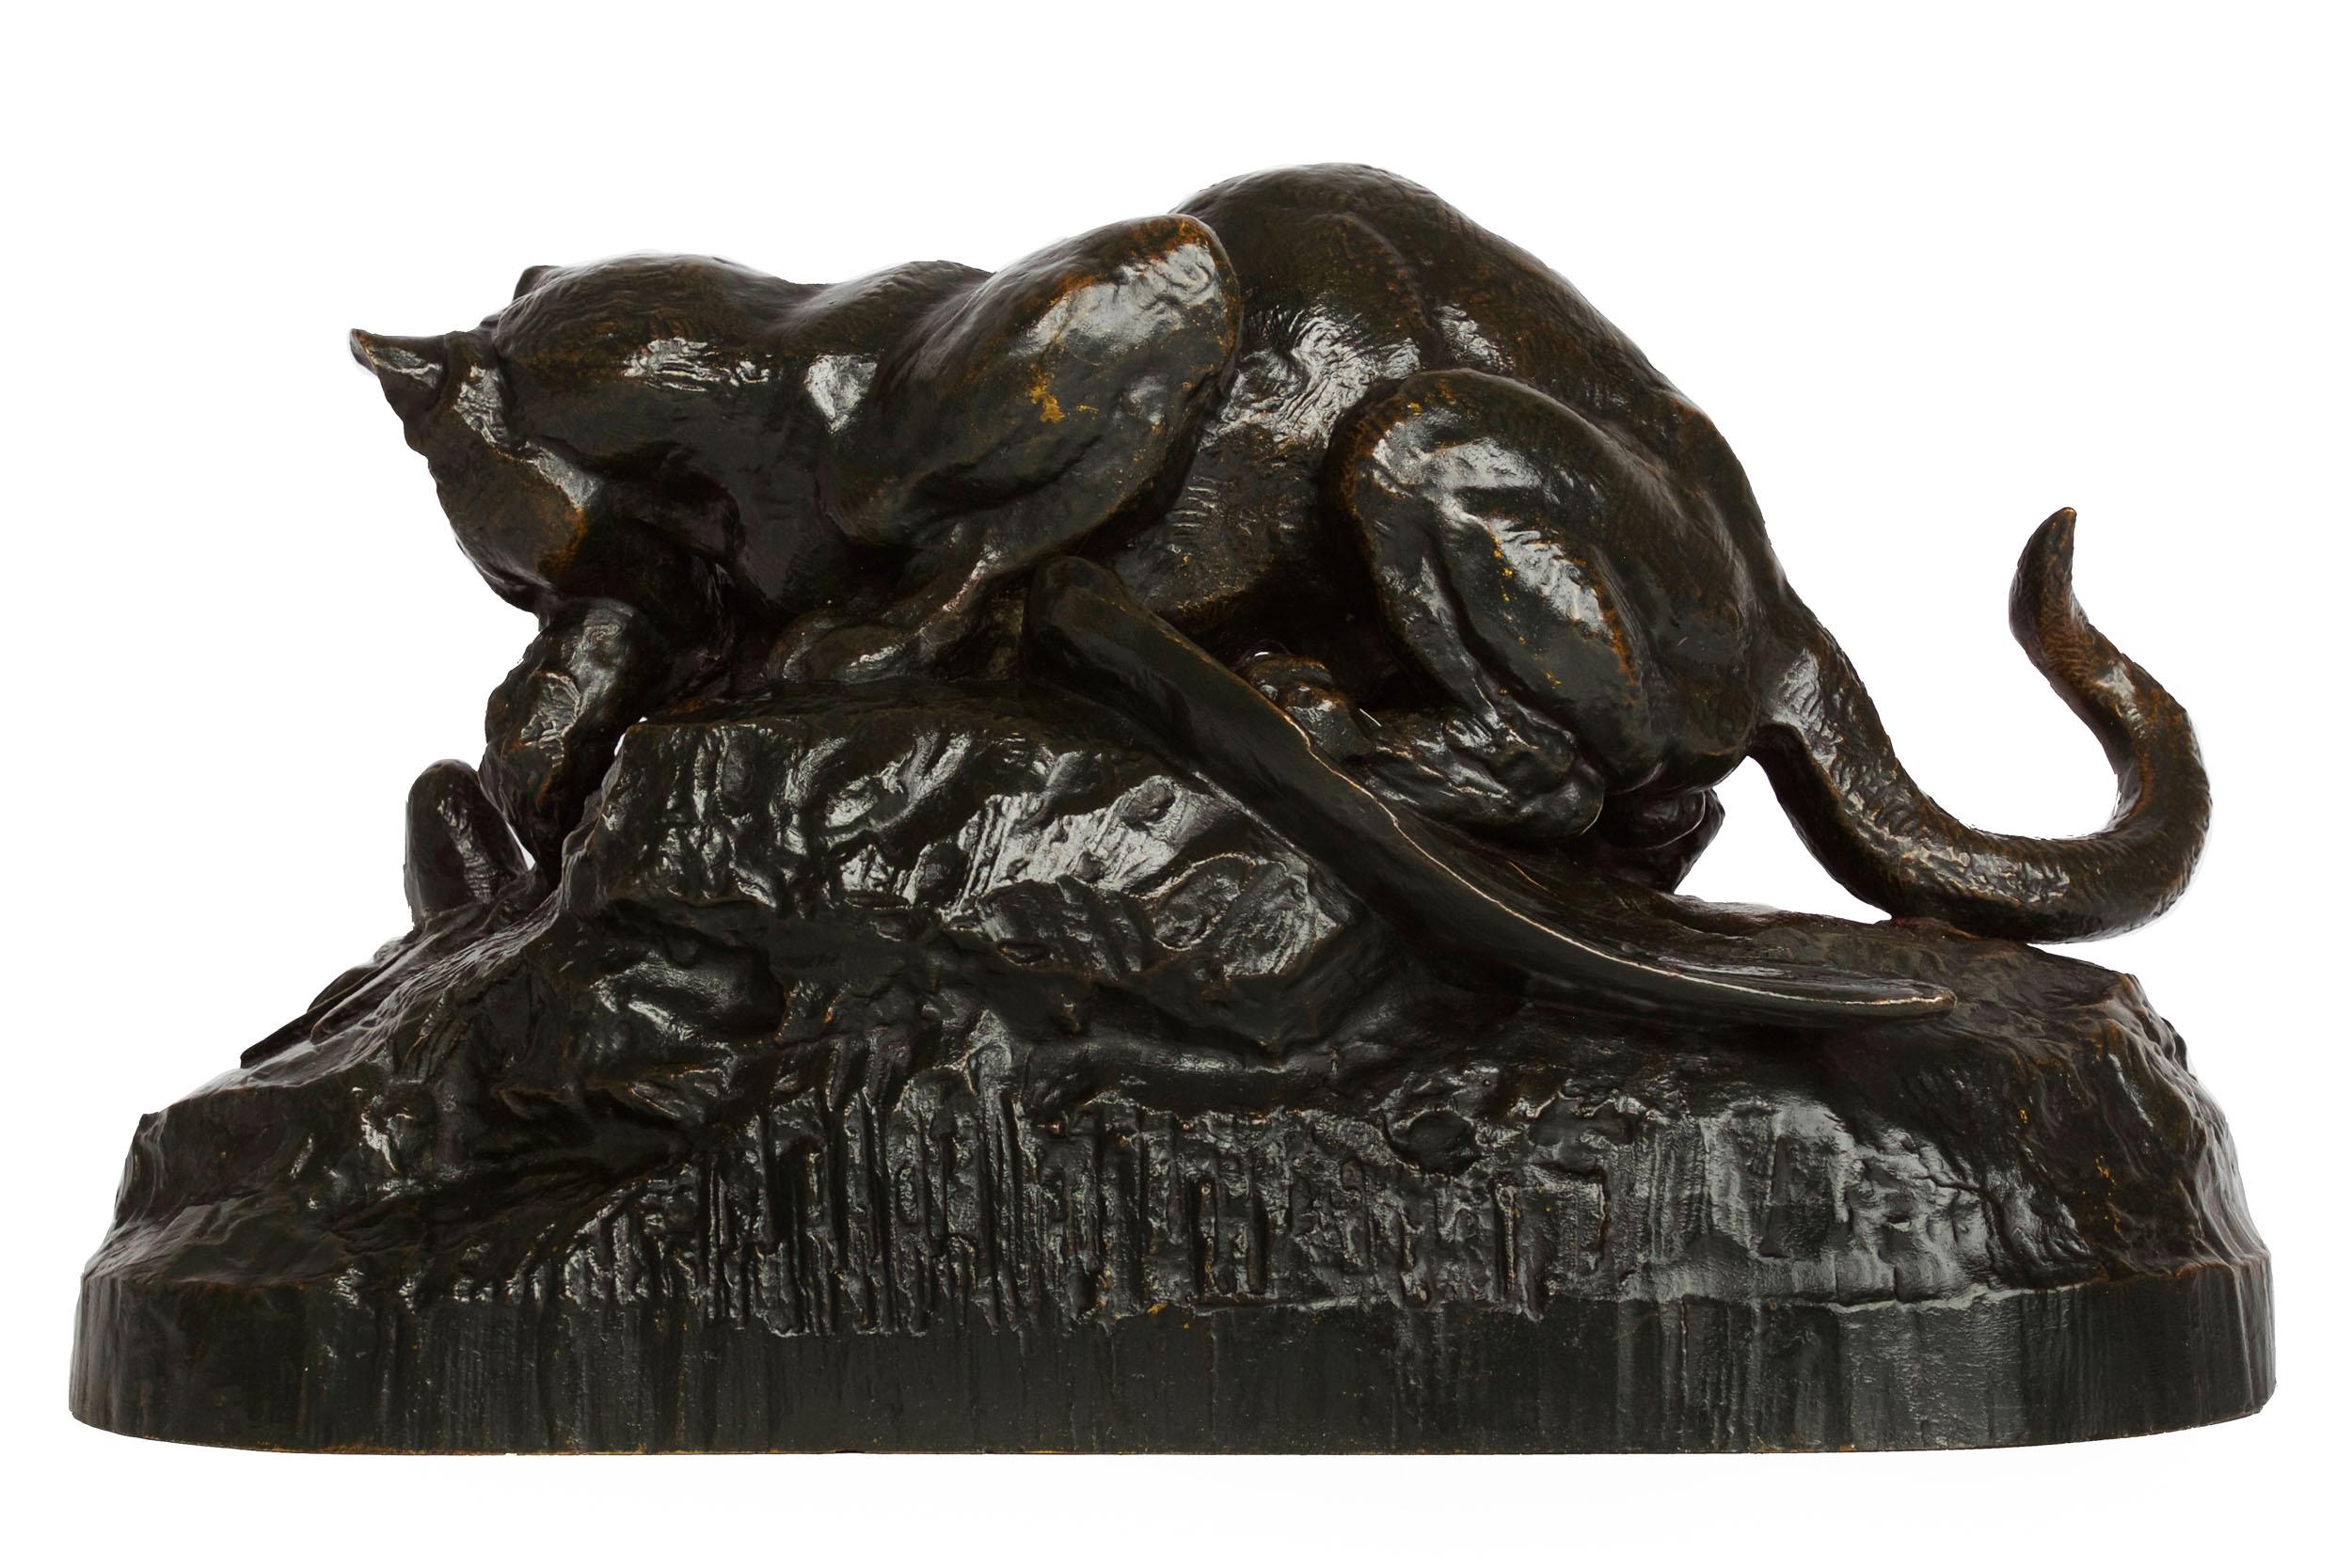 An early Barbedienne casting from the molds acquired at the sale of Barye's estate in 1876 for 500 francs (no. 590), the model depicts a wild Ocelot dragging a Heron across the soil. The angular composition of the scene is notable with a distinct